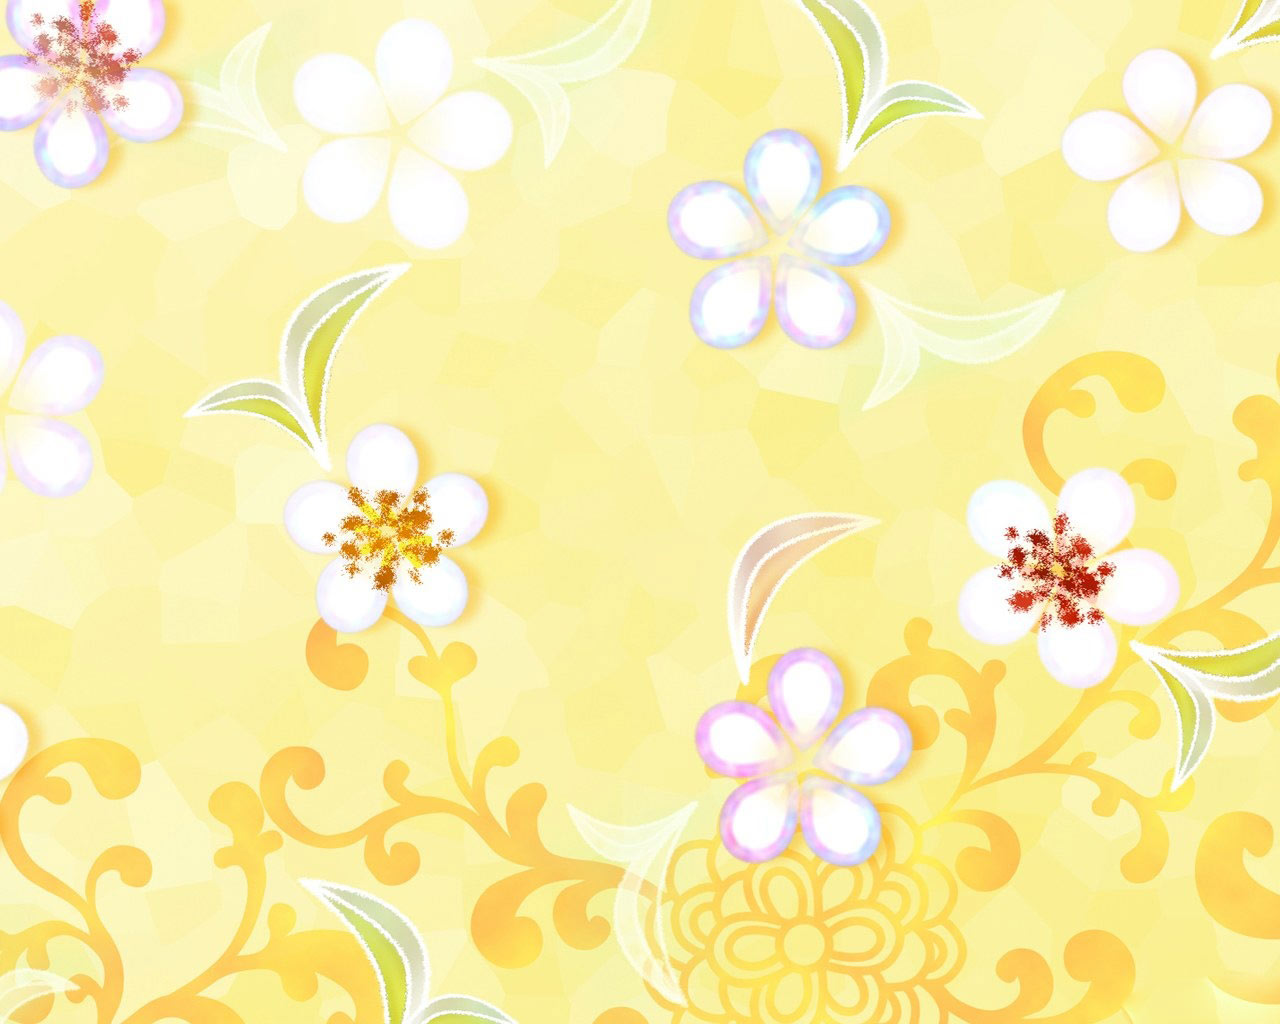  Spring flowers yellow background hd Wallpaper and make this wallpaper